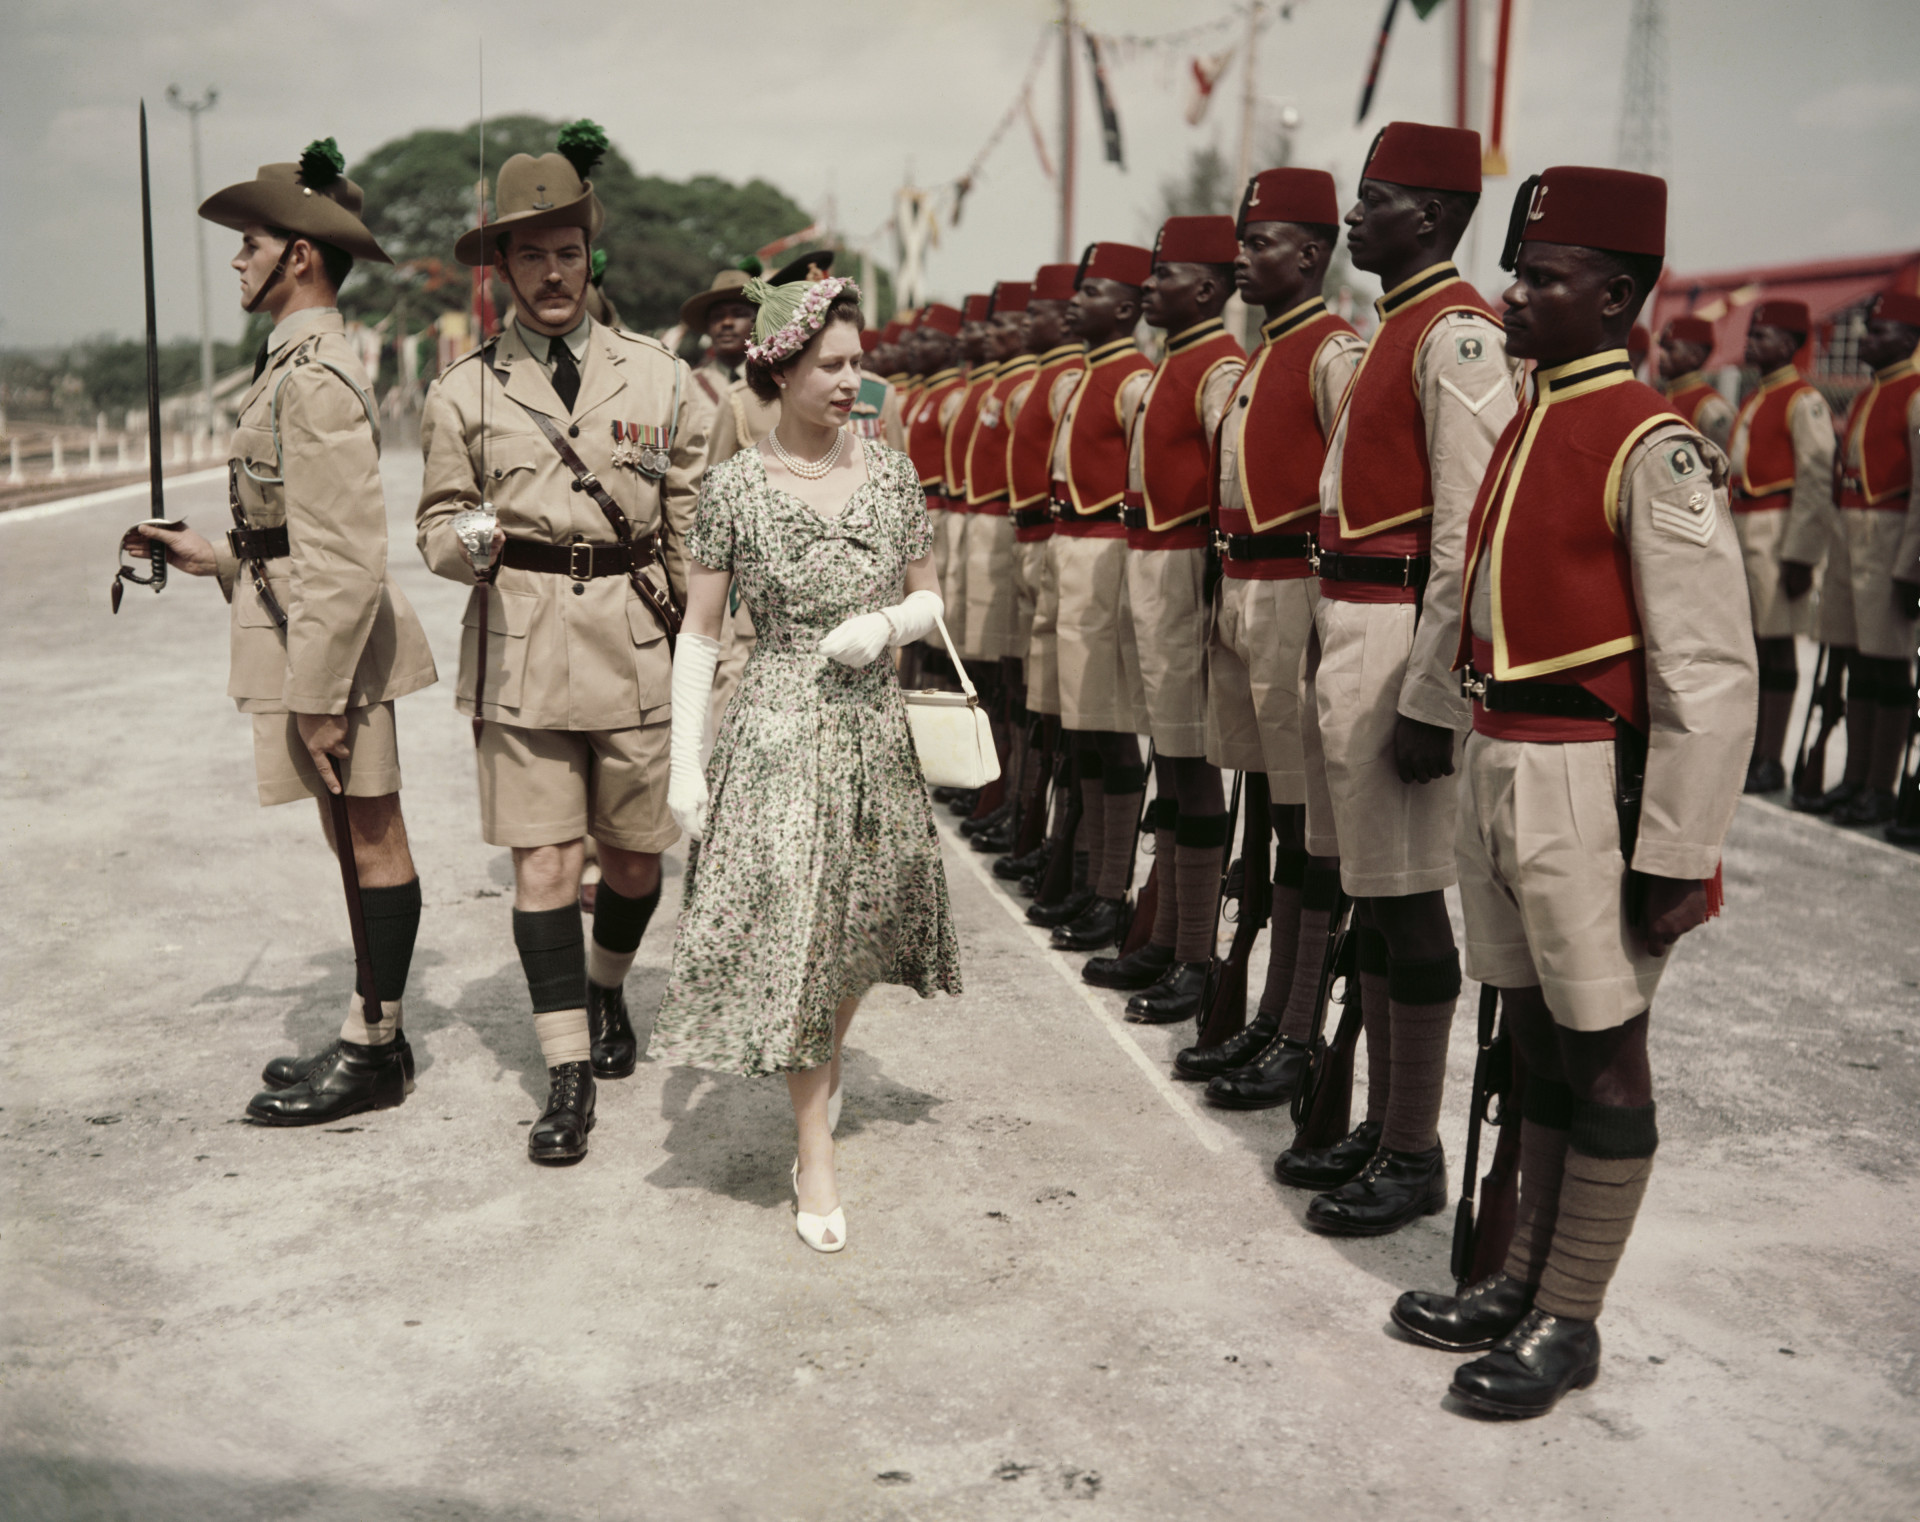 <p>Tours and official visits were a well-known part of the Queen’s job. Particularly in her younger years, she was often seen traveling to different corners of the world to meet with their leaders and take in the sights.</p><p><a href="https://www.msn.com/en-au/community/channel/vid-7xx8mnucu55yw63we9va2gwr7uihbxwc68fxqp25x6tg4ftibpra?cvid=94631541bc0f4f89bfd59158d696ad7e">Follow us and access great exclusive content every day</a></p>